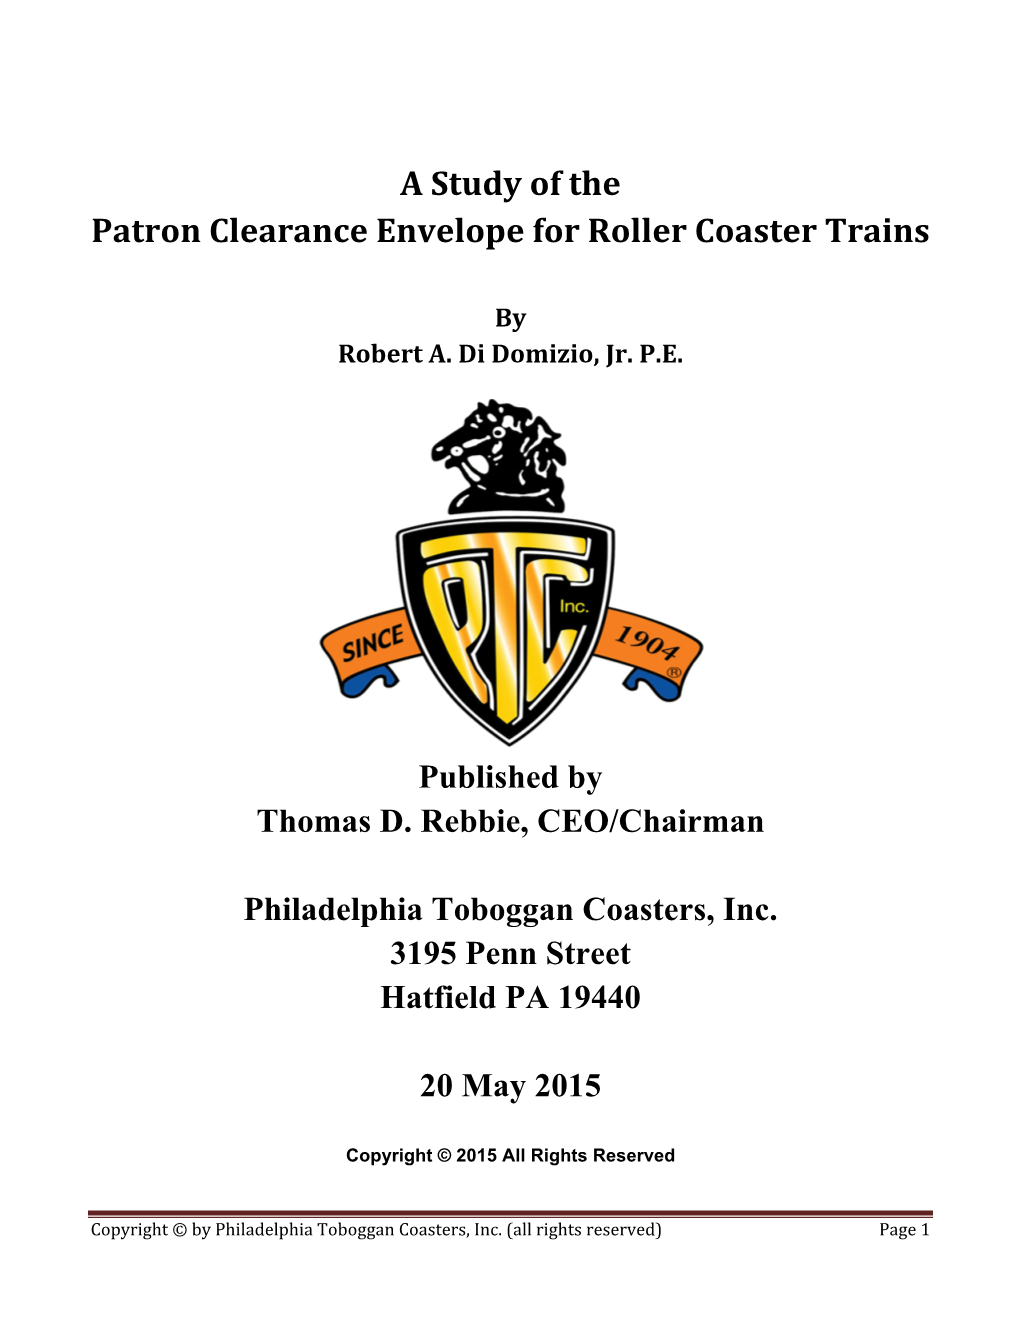 Patron Clearance Envelope for Roller Coaster Trains